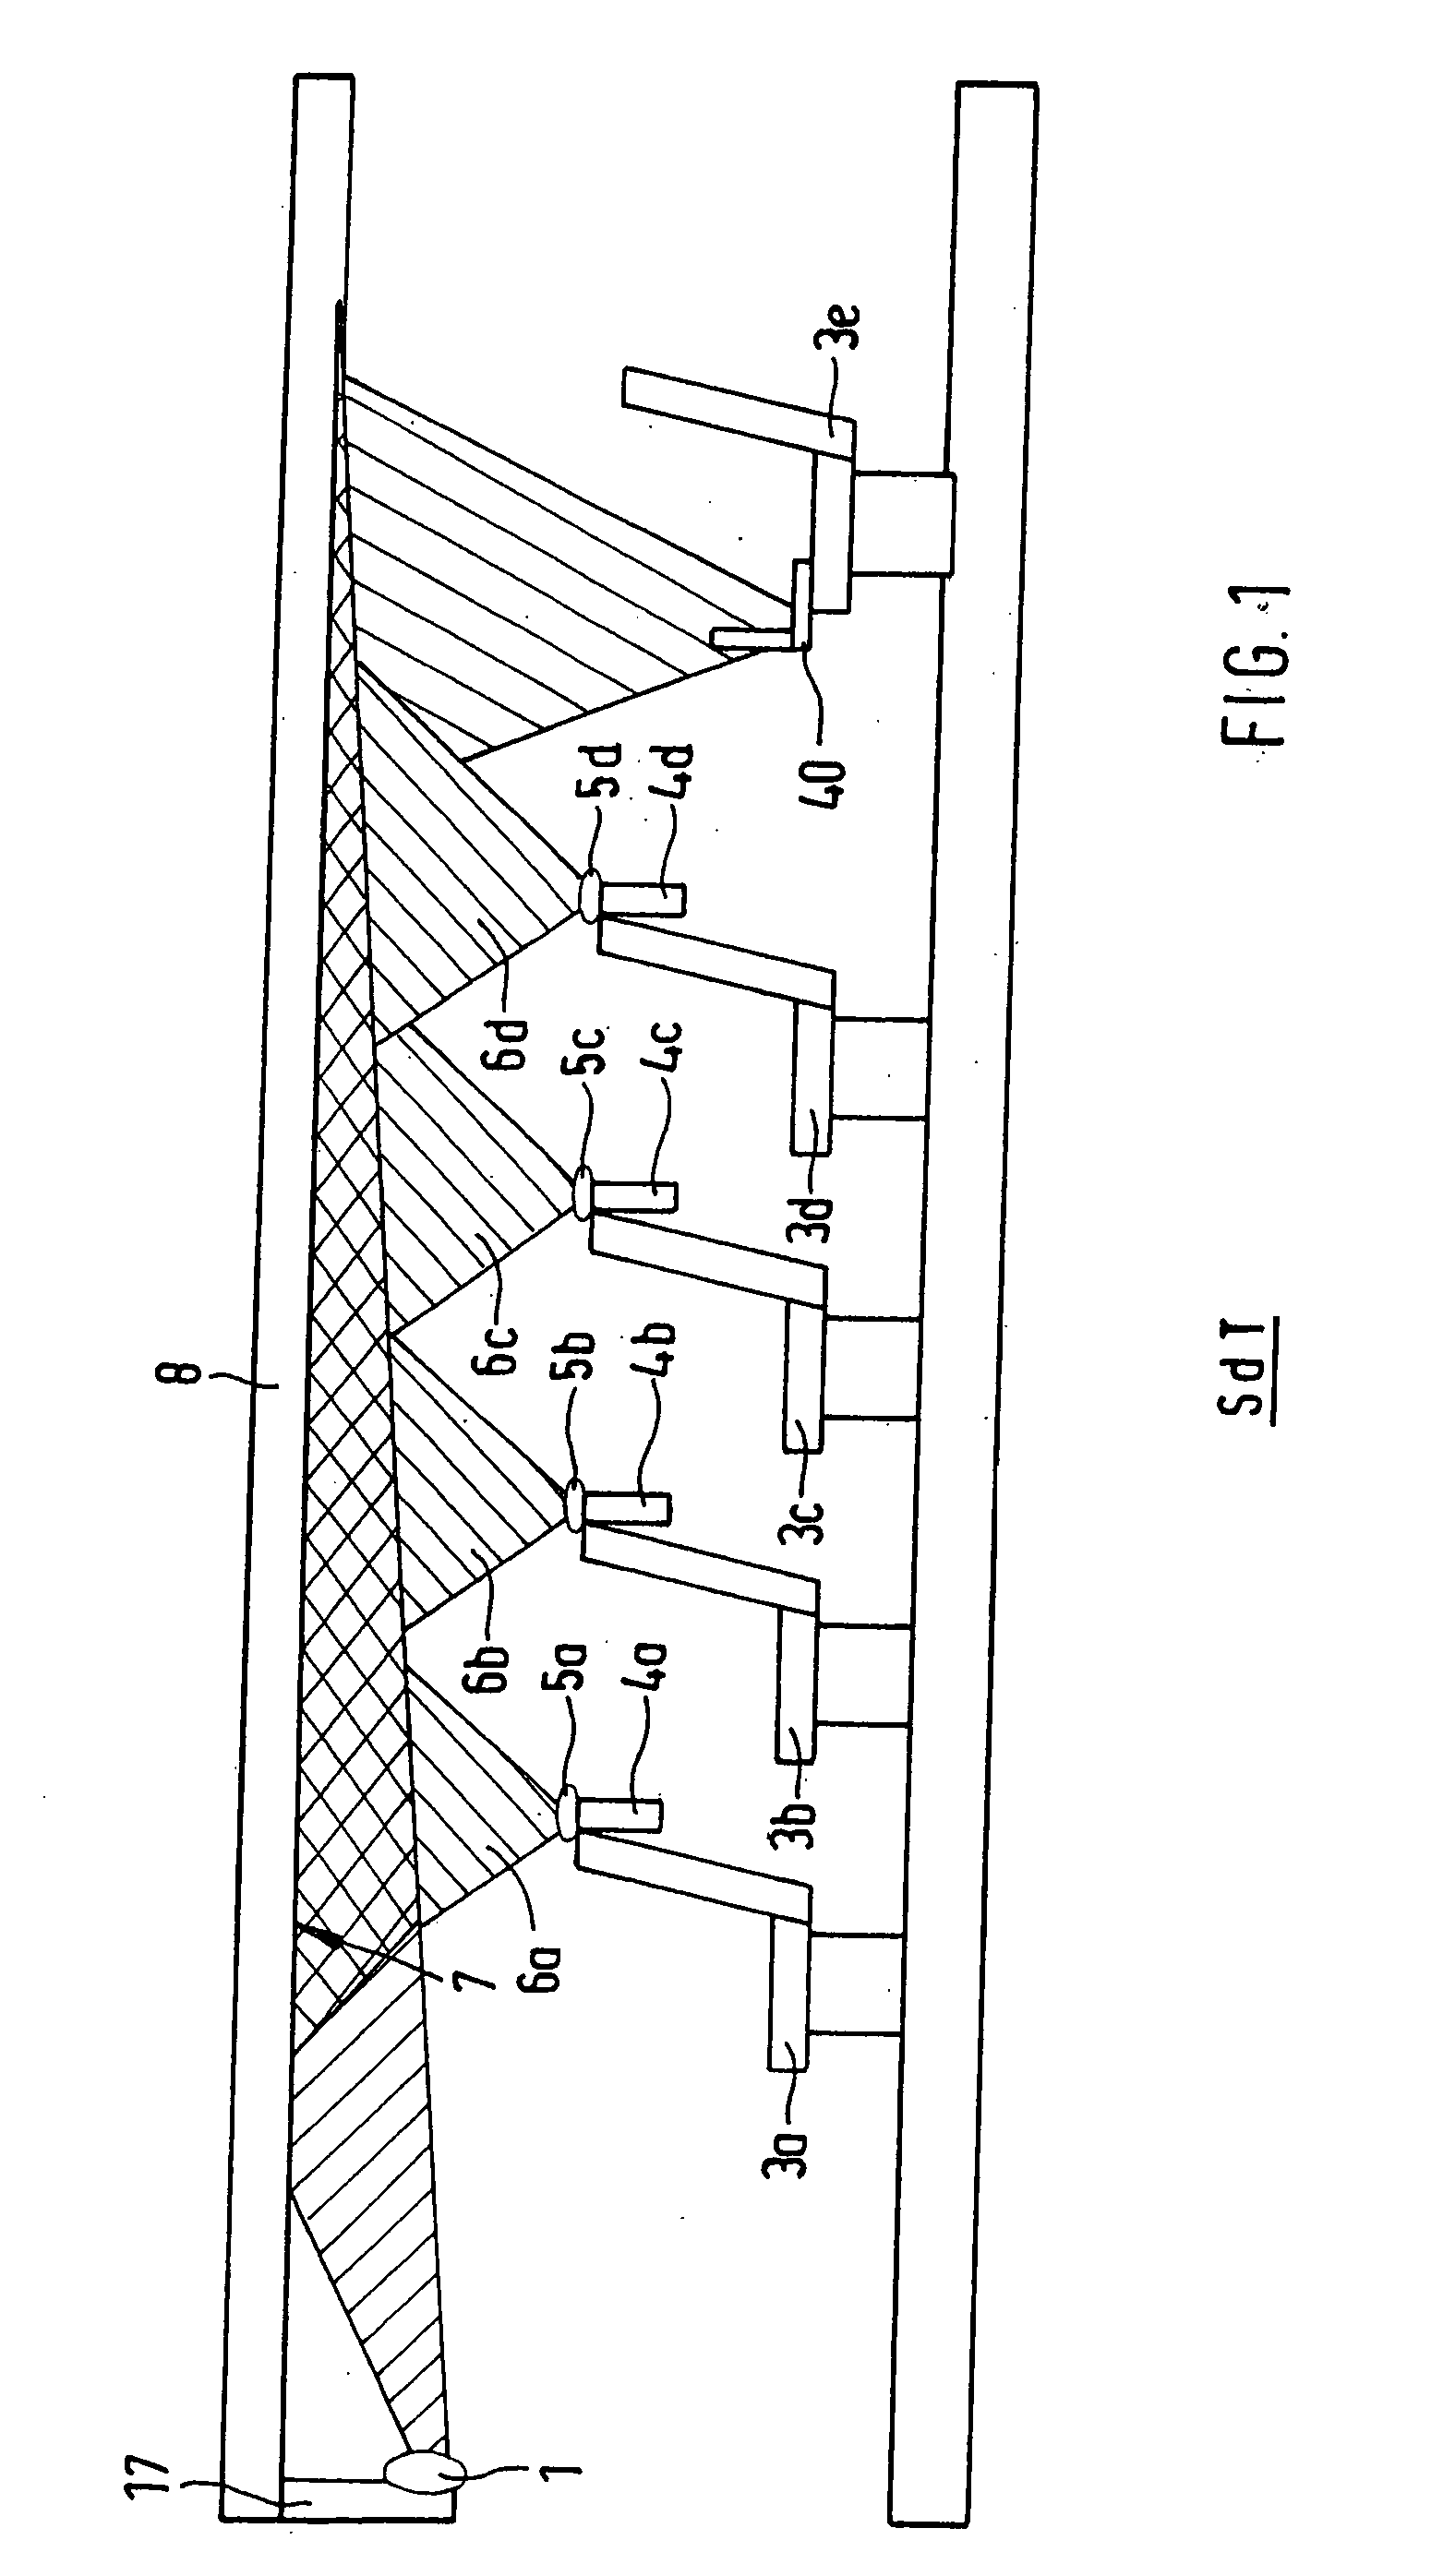 Indirect Optical Free-Space Communications System and Method for the Broadband Transmission of Hight-Speed Data